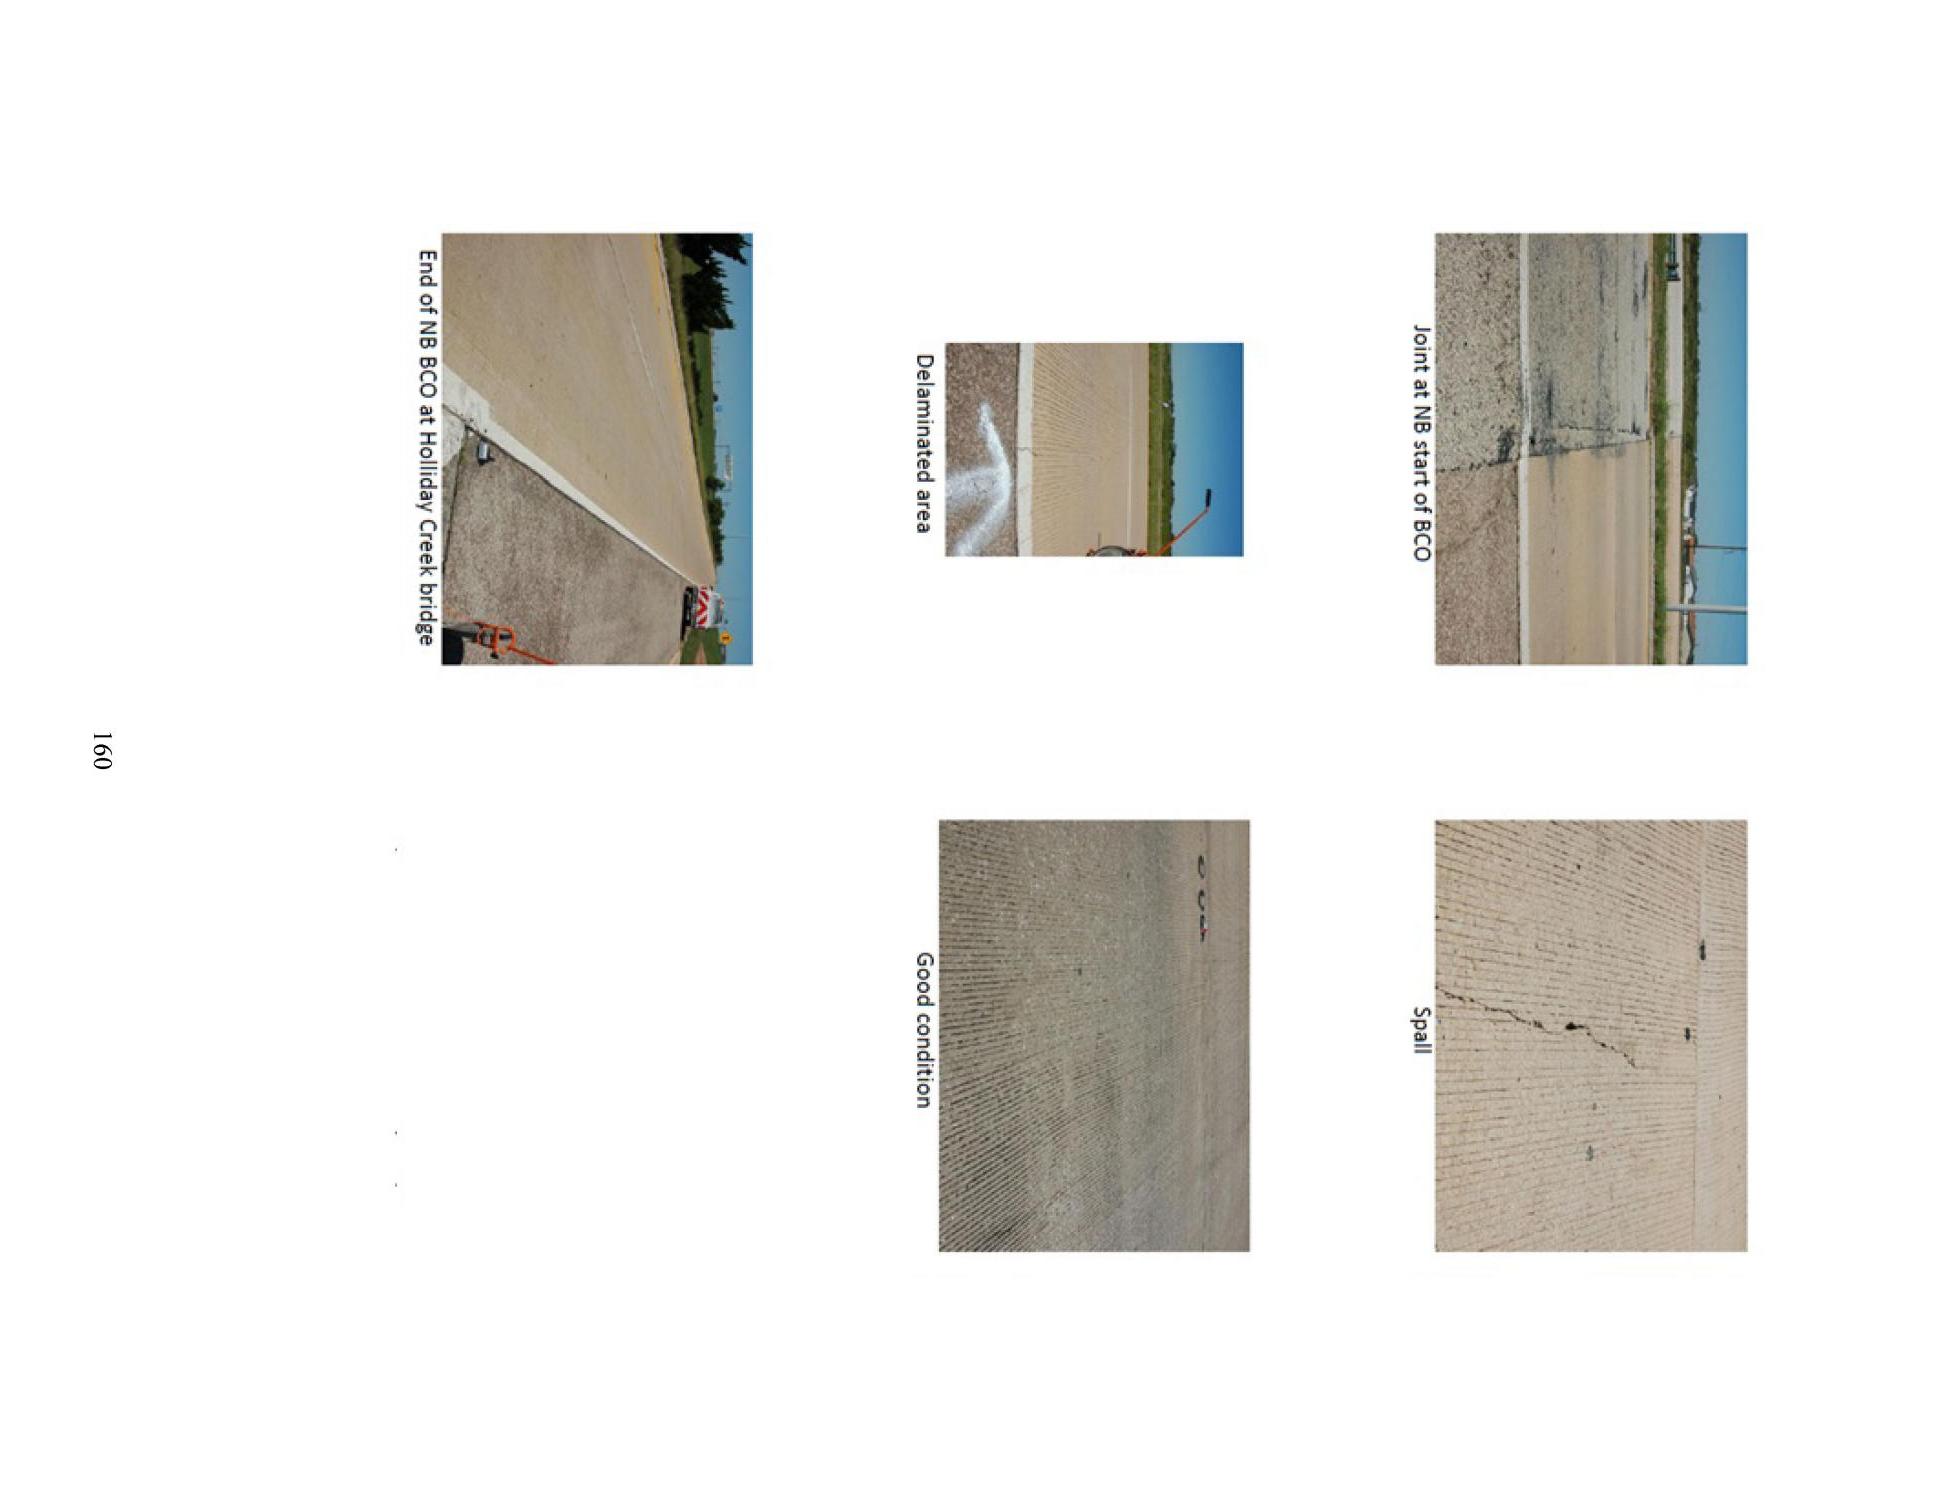 Materials selection for concrete overlays : the final report
                                                
                                                    160
                                                